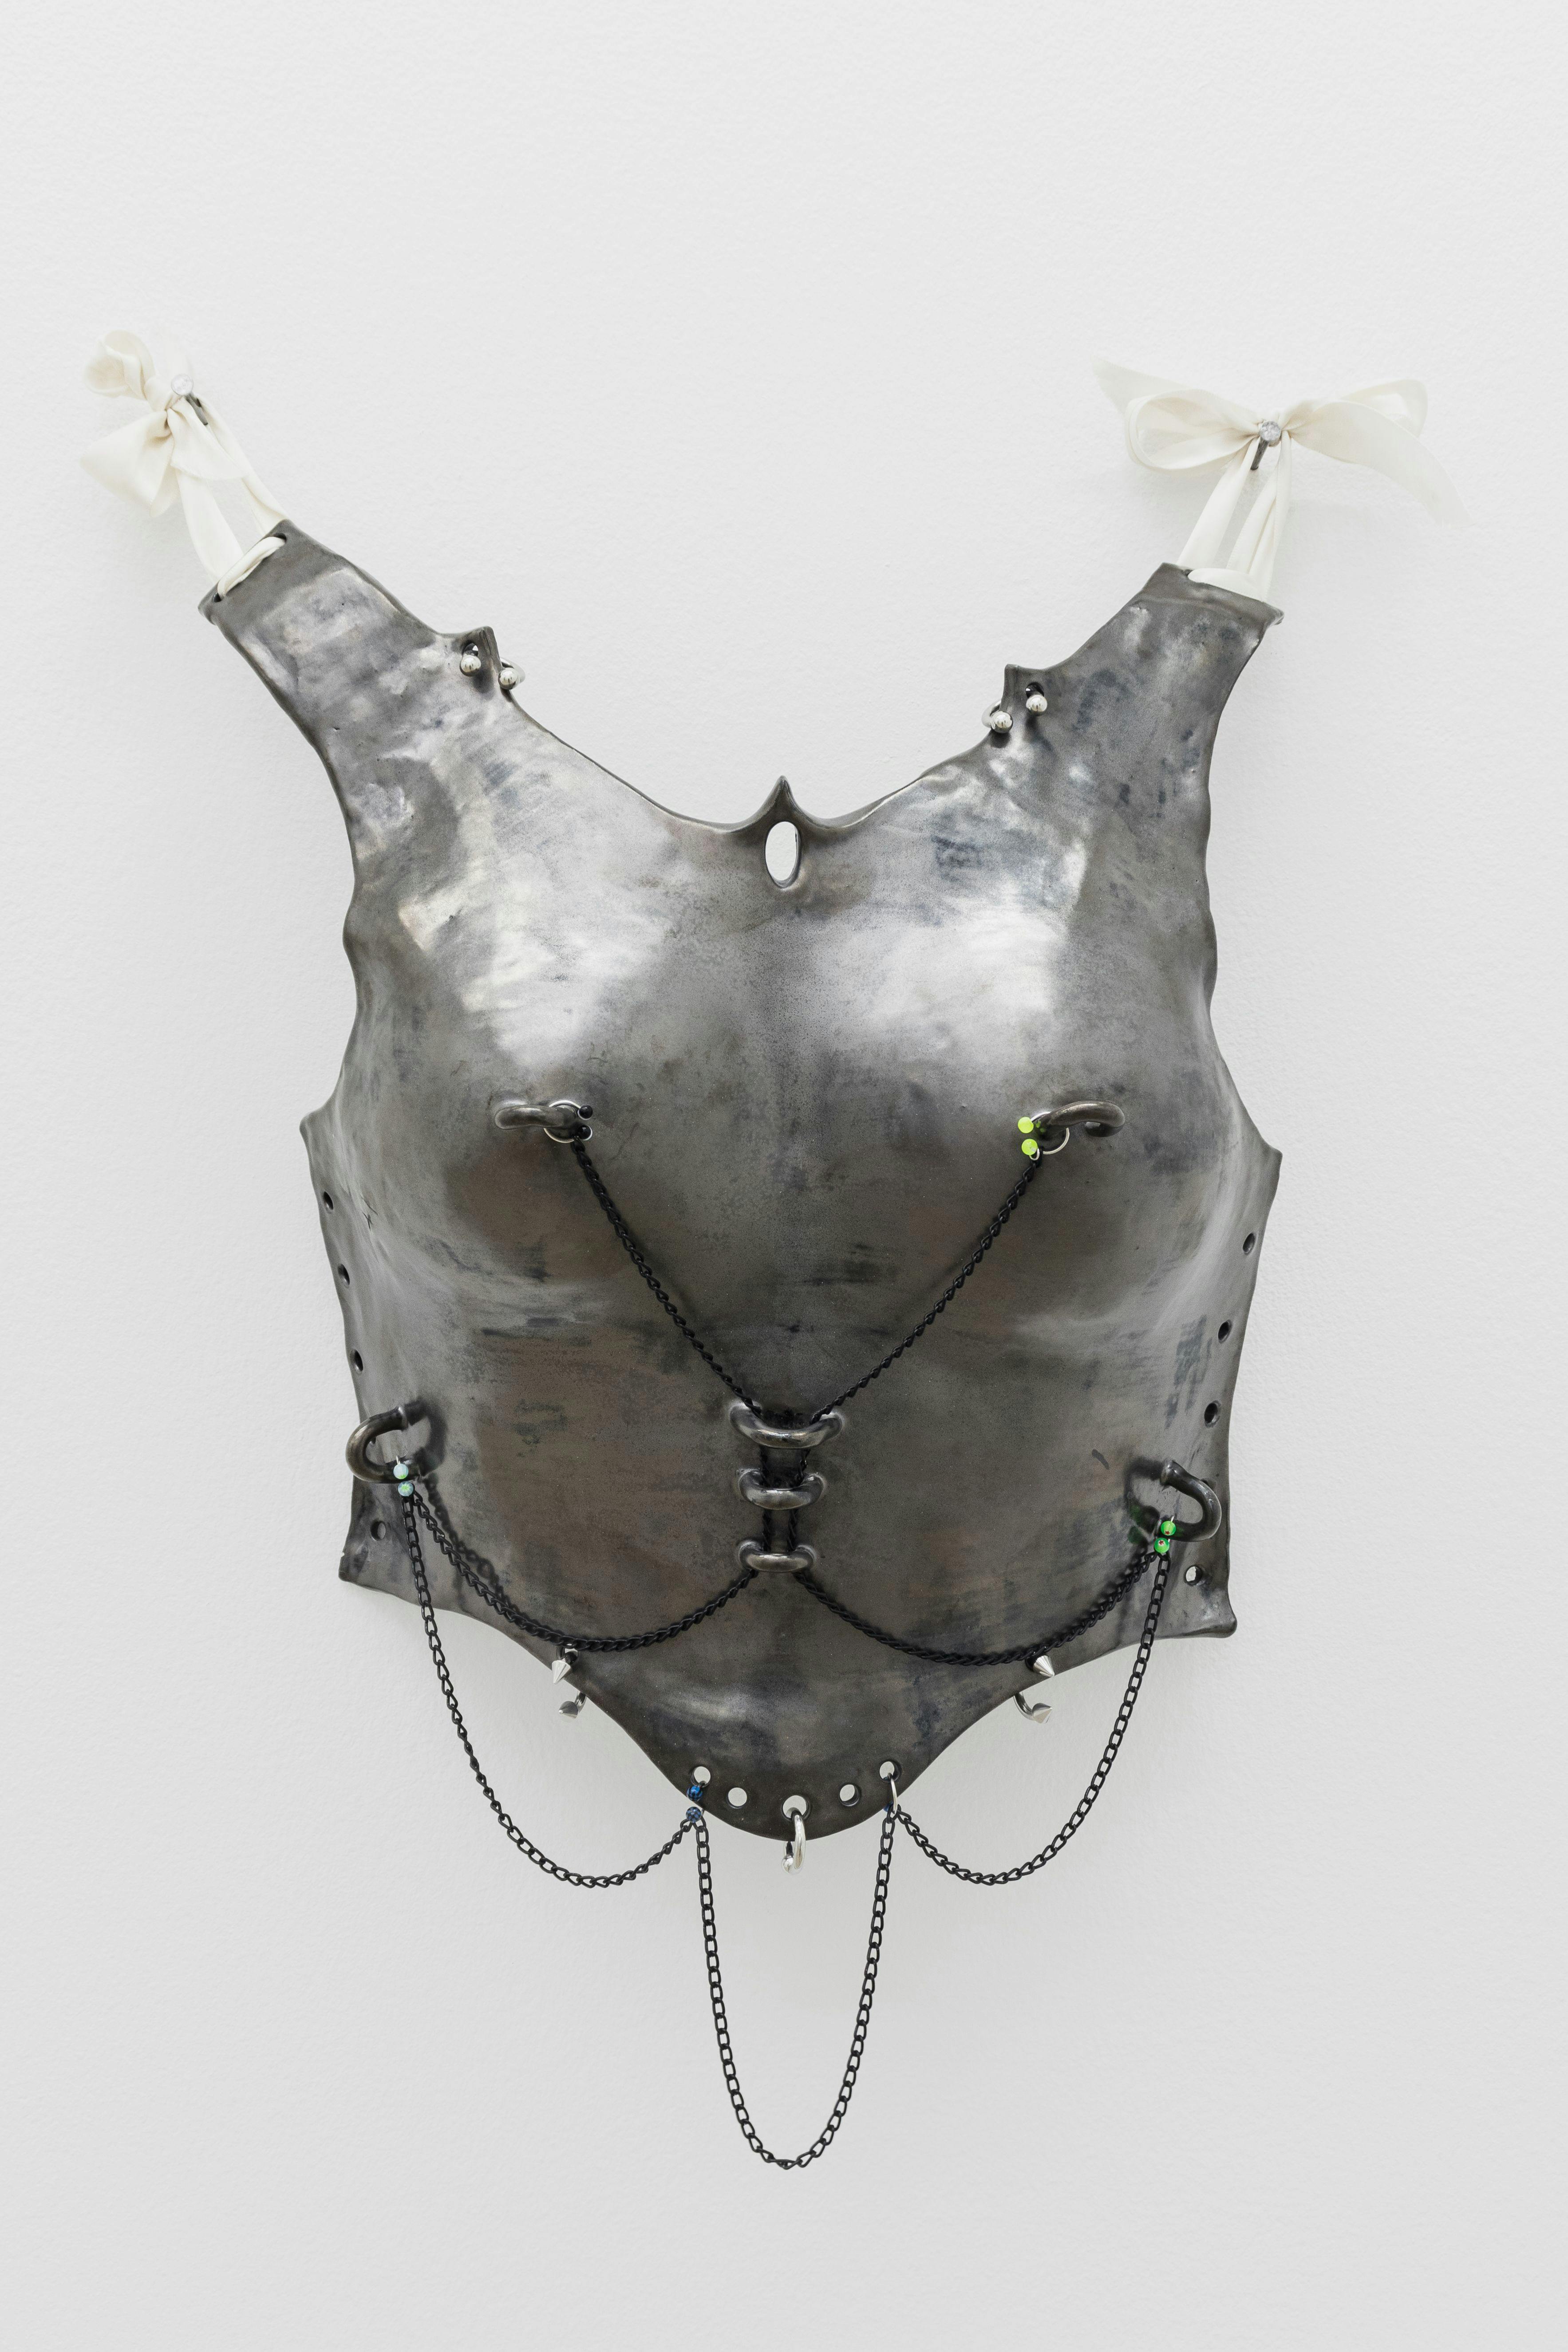 Breastplate 3, 2023

glazed stoneware, stainless steel jewelry

19 x 14 x 6 inches